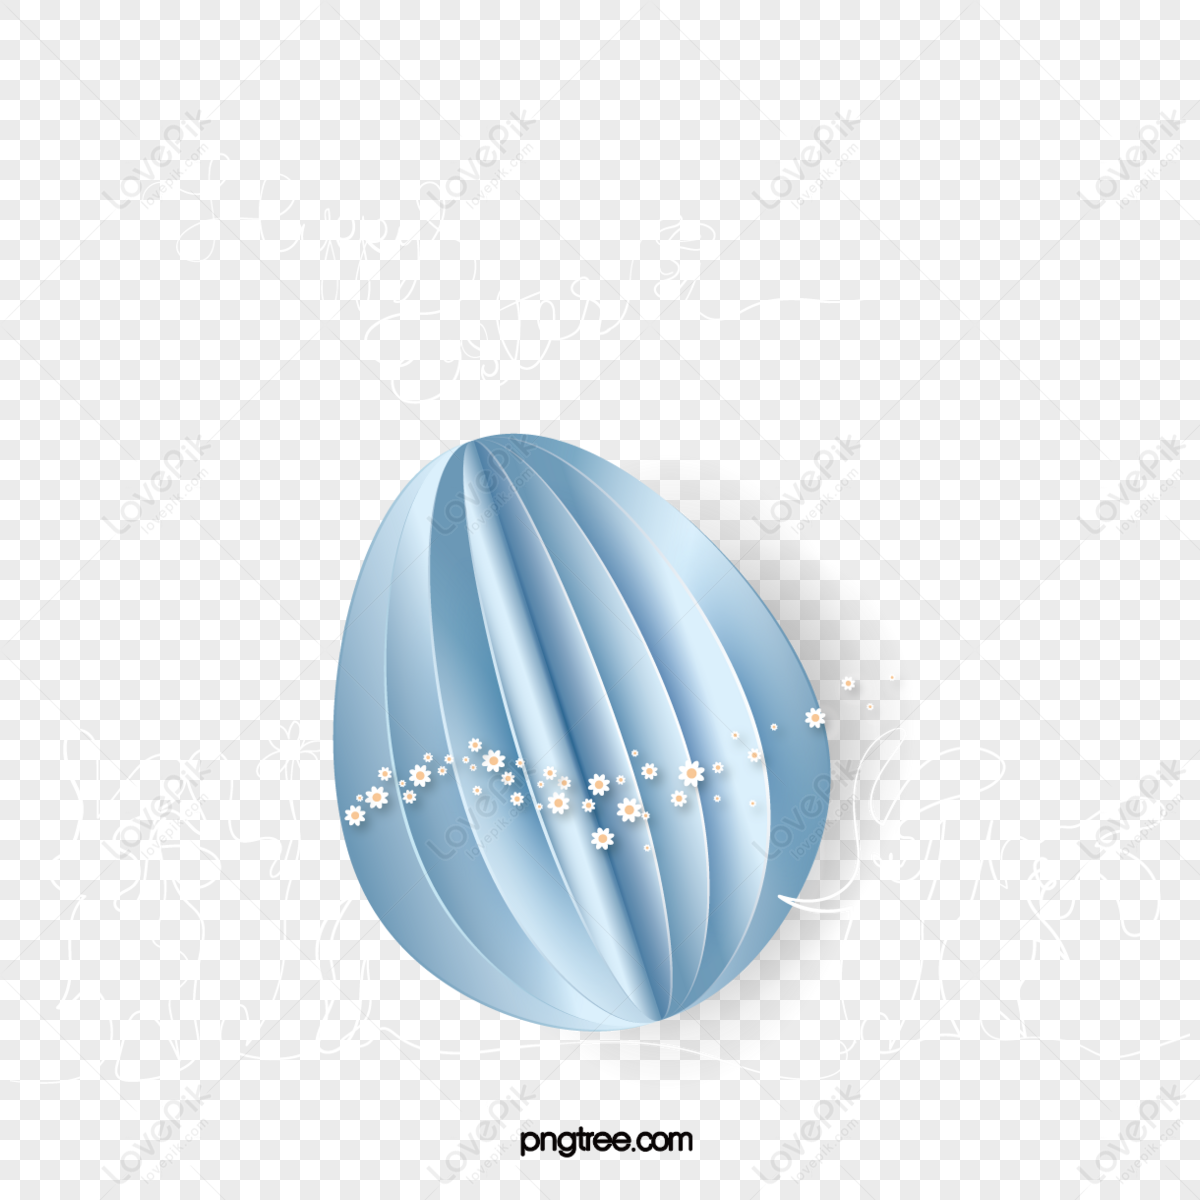 Ribbon flower clipart. Free download transparent .PNG